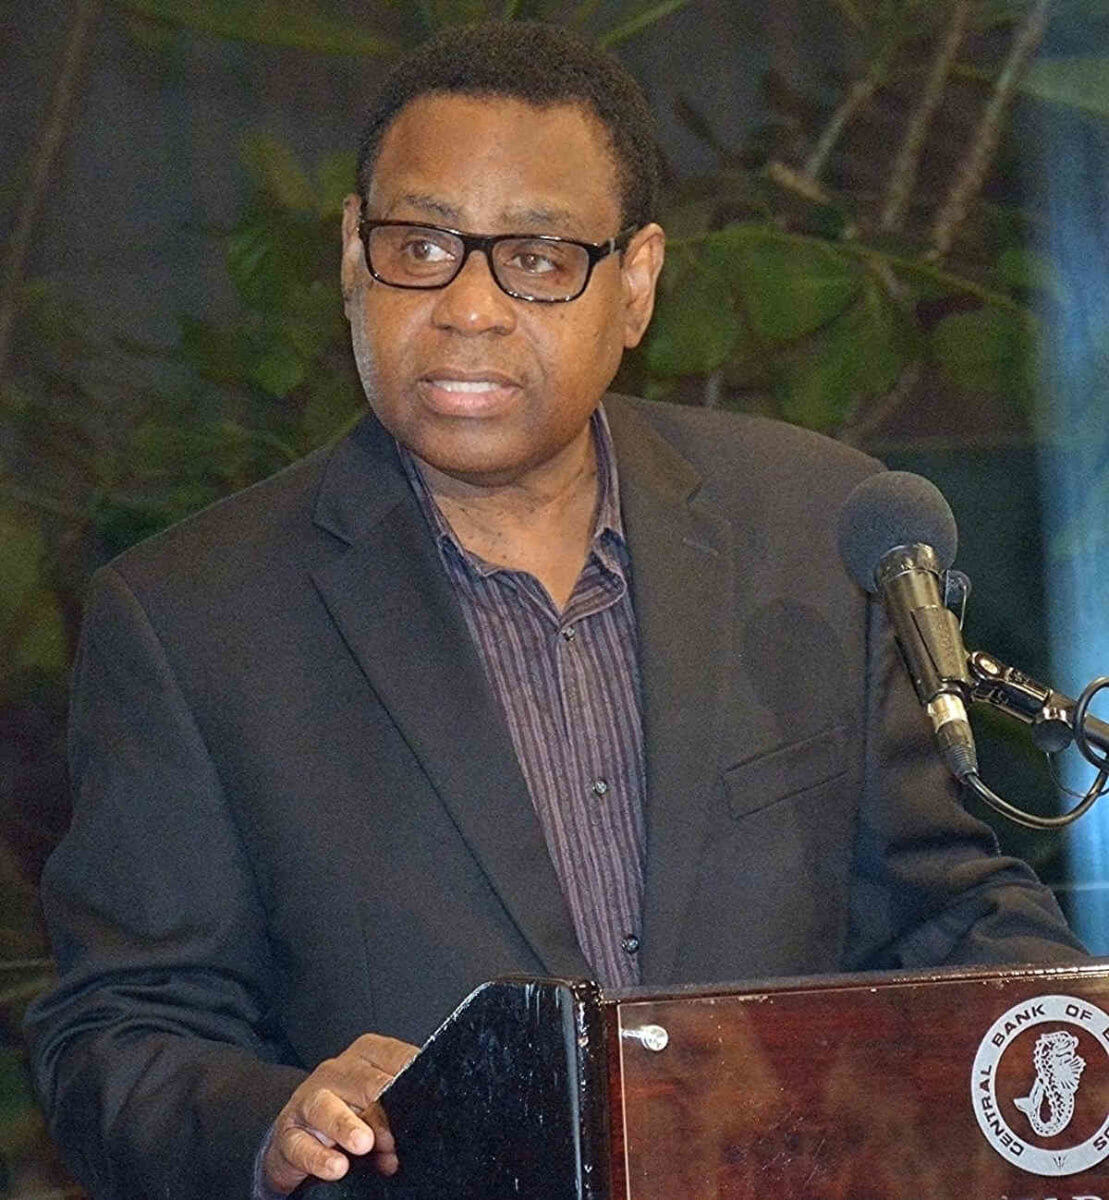 Bright markers on Barbados’ recovery